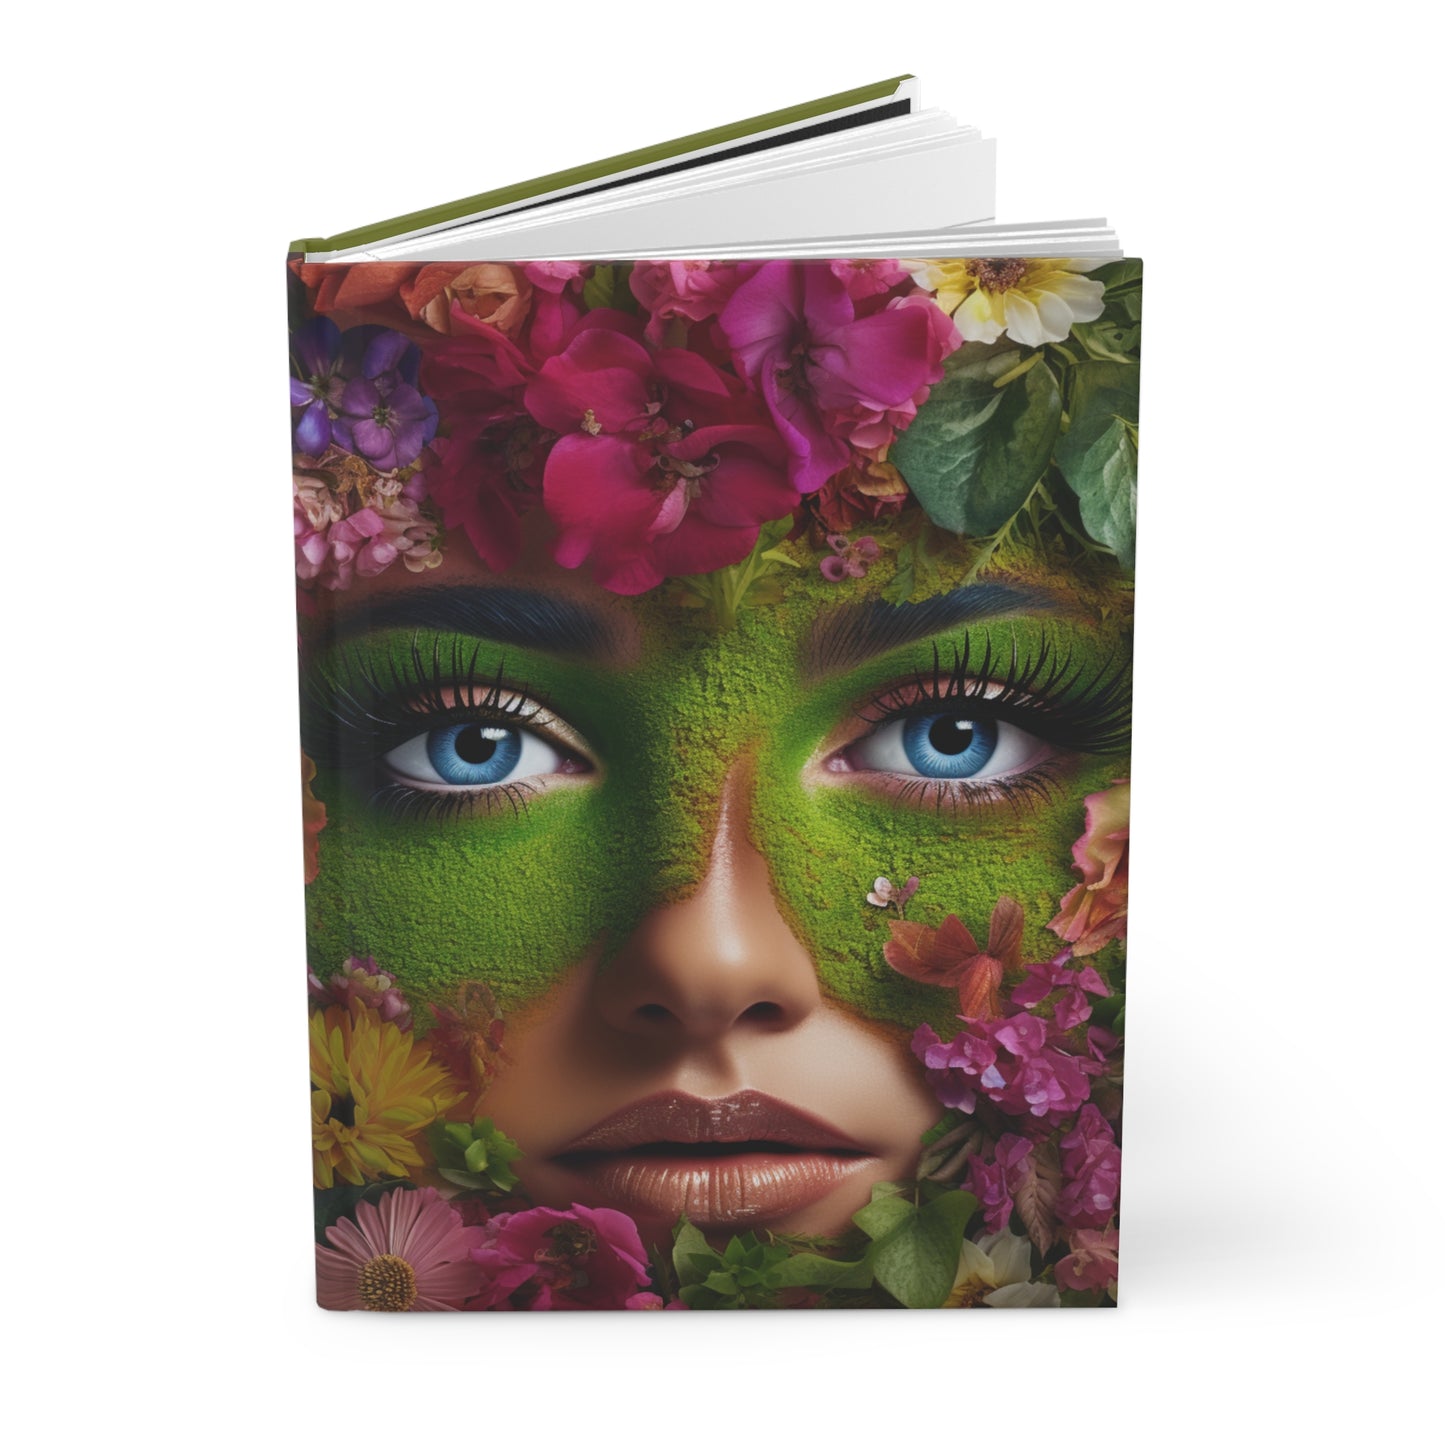 Mossy Floral Woman Hardcover Notebook, Eco-Friendly Gift, Nature-Inspired Journal, Lined Paper Diary, Elegant Cover Design, Size 5.75"x7.5"